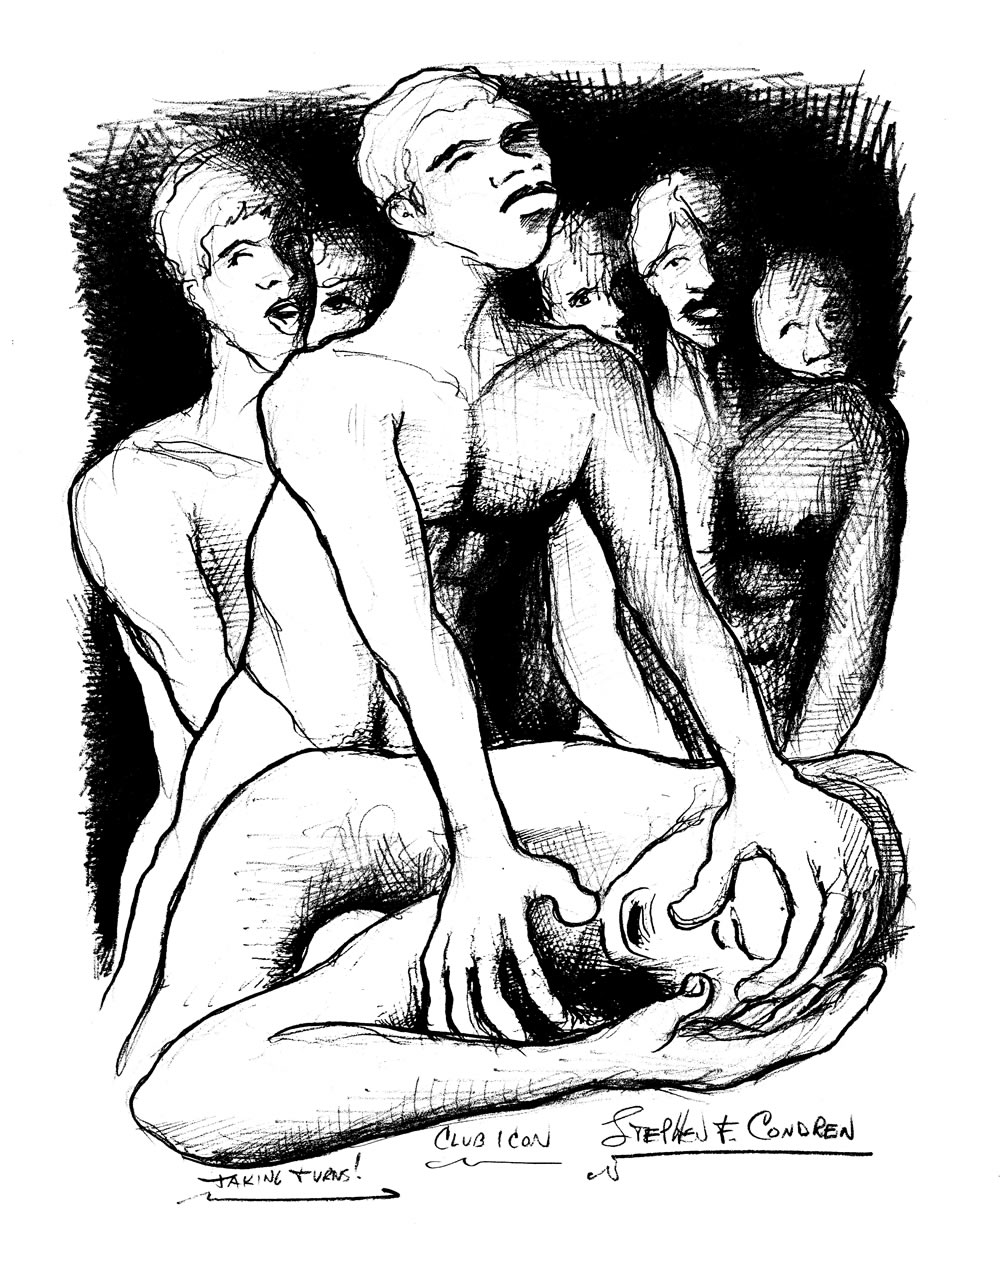 Pencil drawing of a gay gang bang prison rape of a young hot inmate. Inmates have muscular torsos and fit abs.